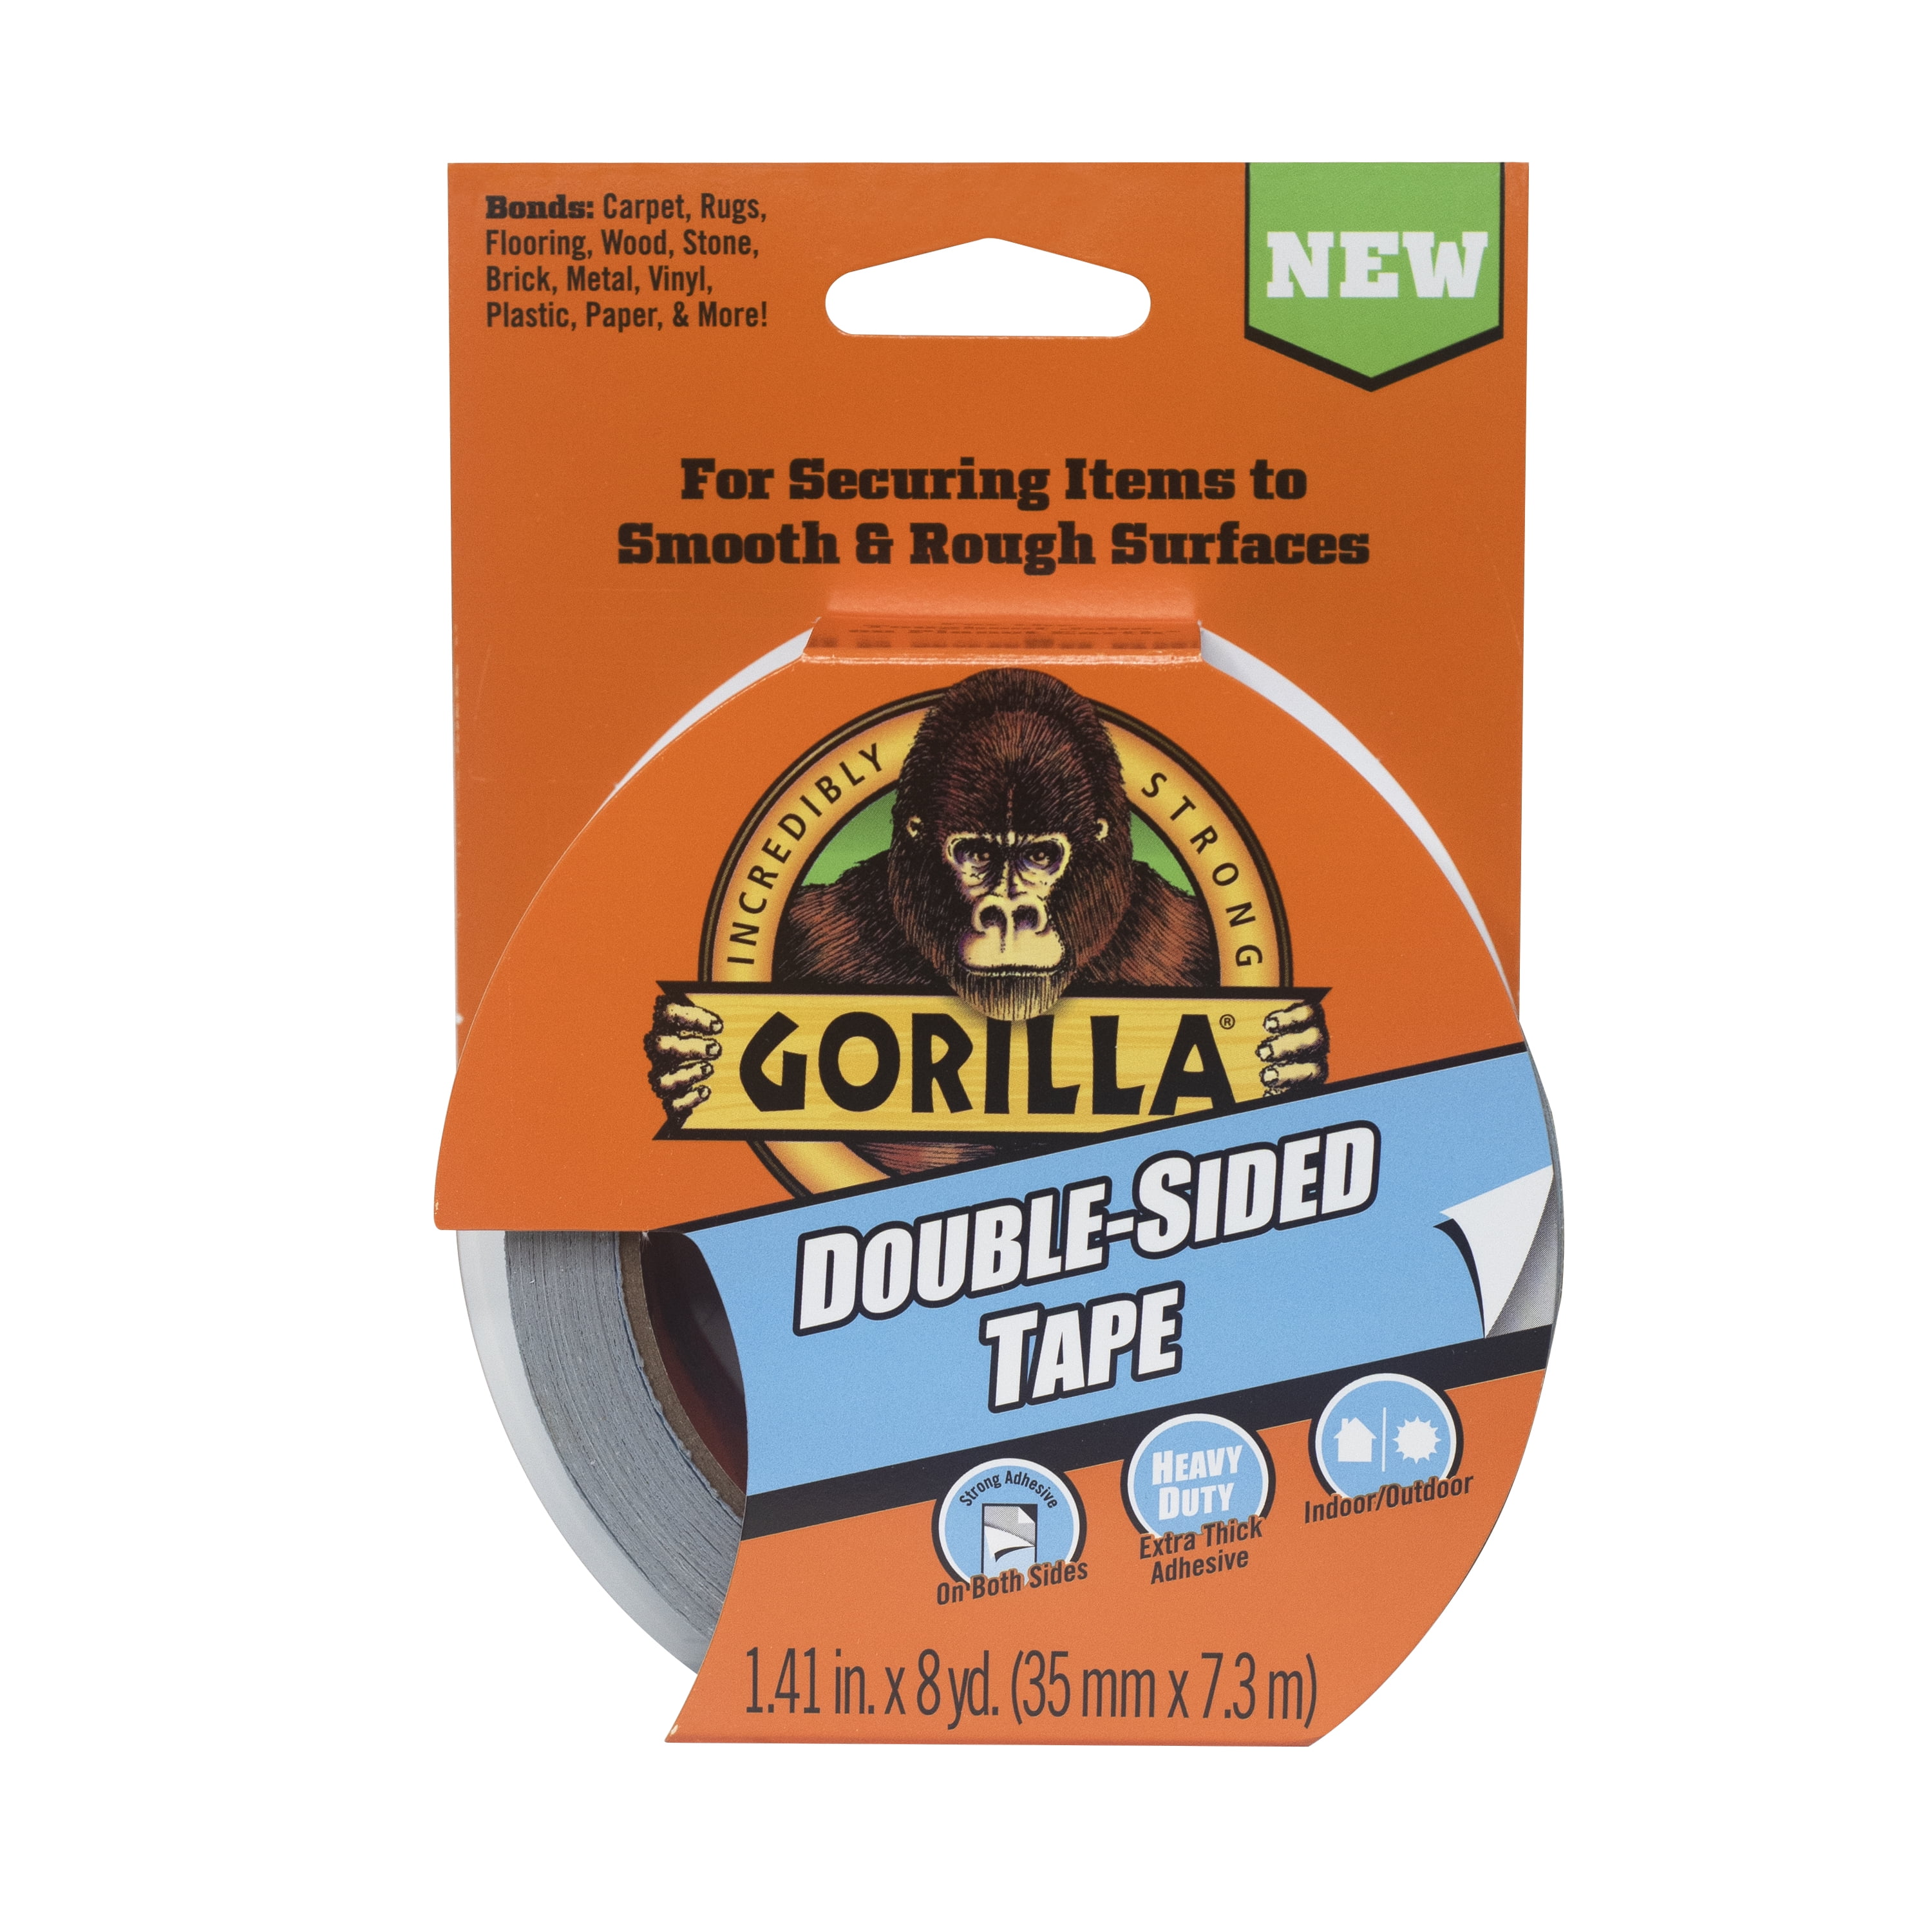 Gorilla Glue Double-Sided Tape, Gray Roll Assembled Product Weight 0.386 lb